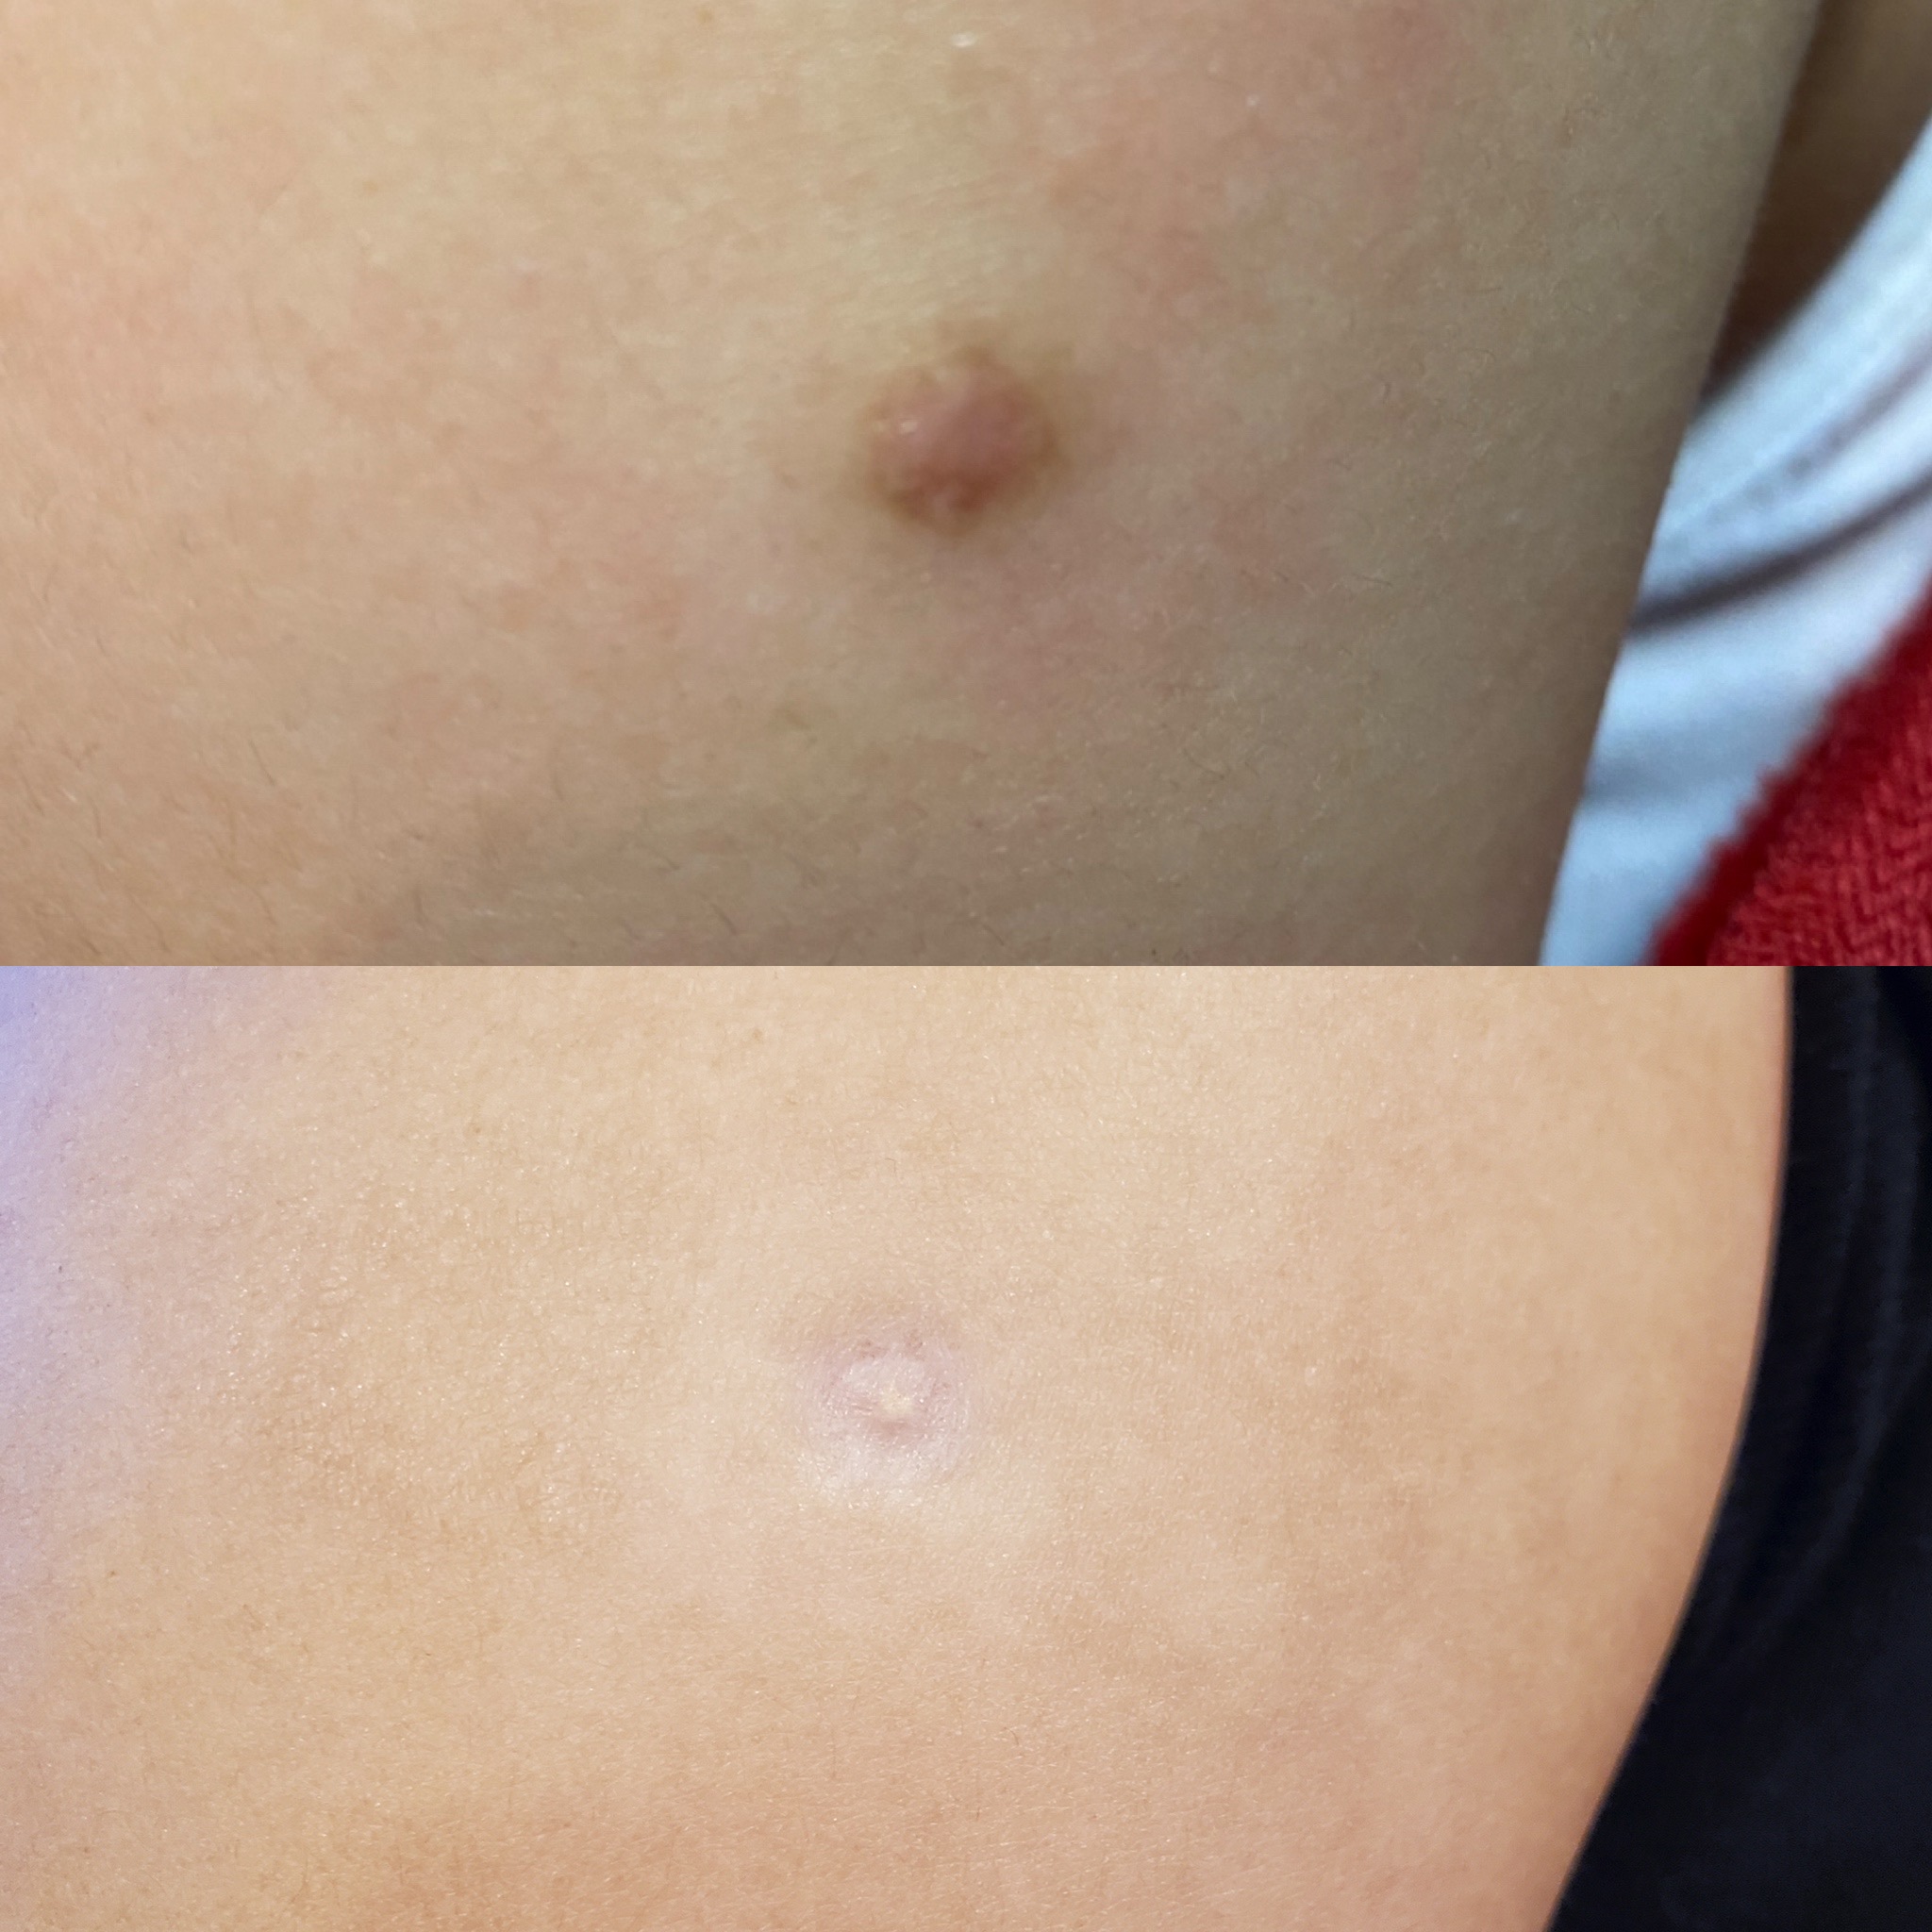 Scar treatment before and after images